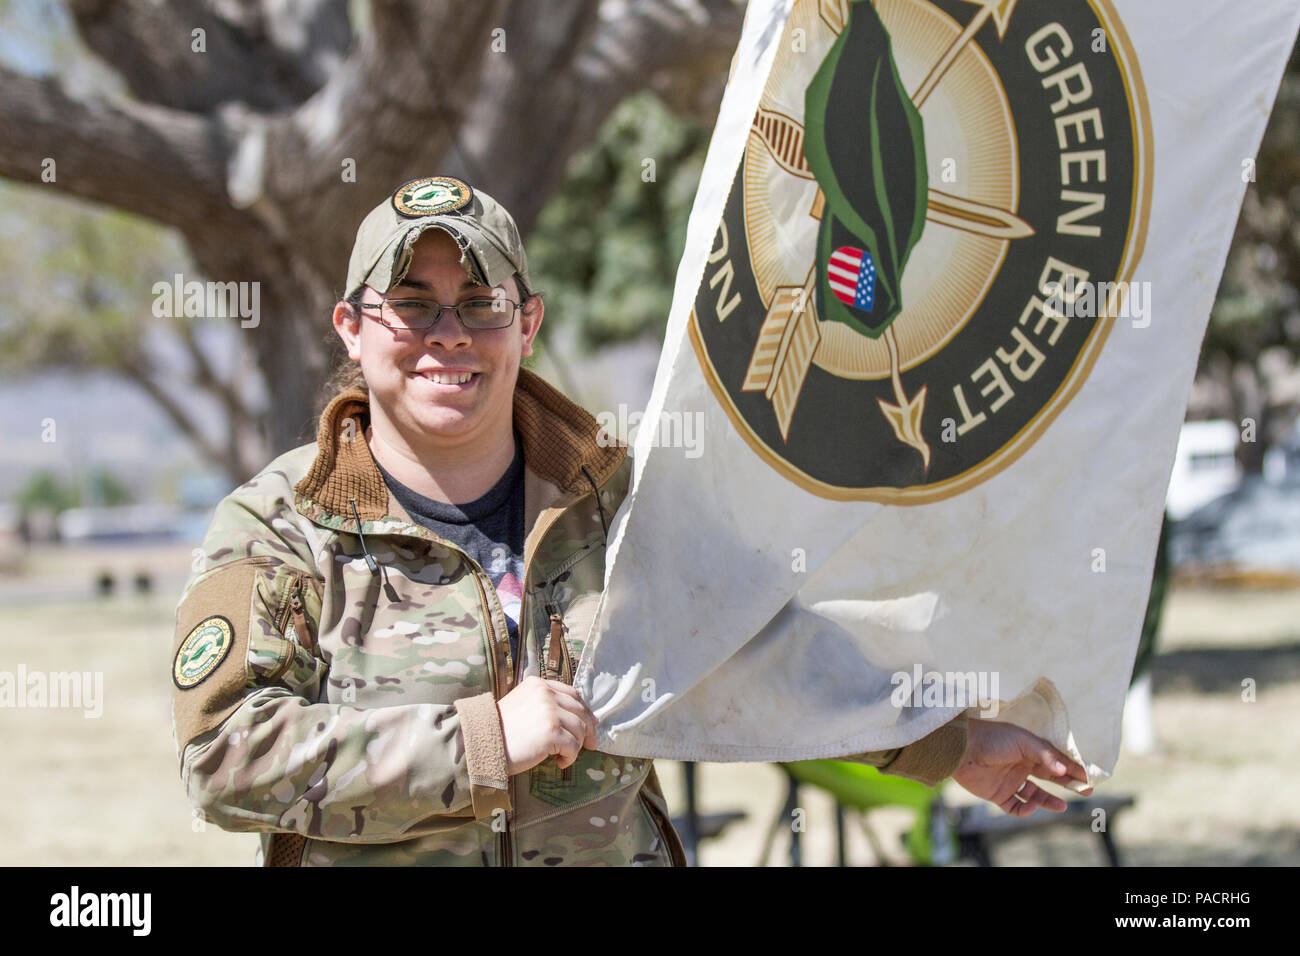 Frances Arias, an operations manager with the Green Beret Foundation from  San Antonio, participated in the Bataan Memorial Death March for the third  time. After studying military history, Arias felt the impact